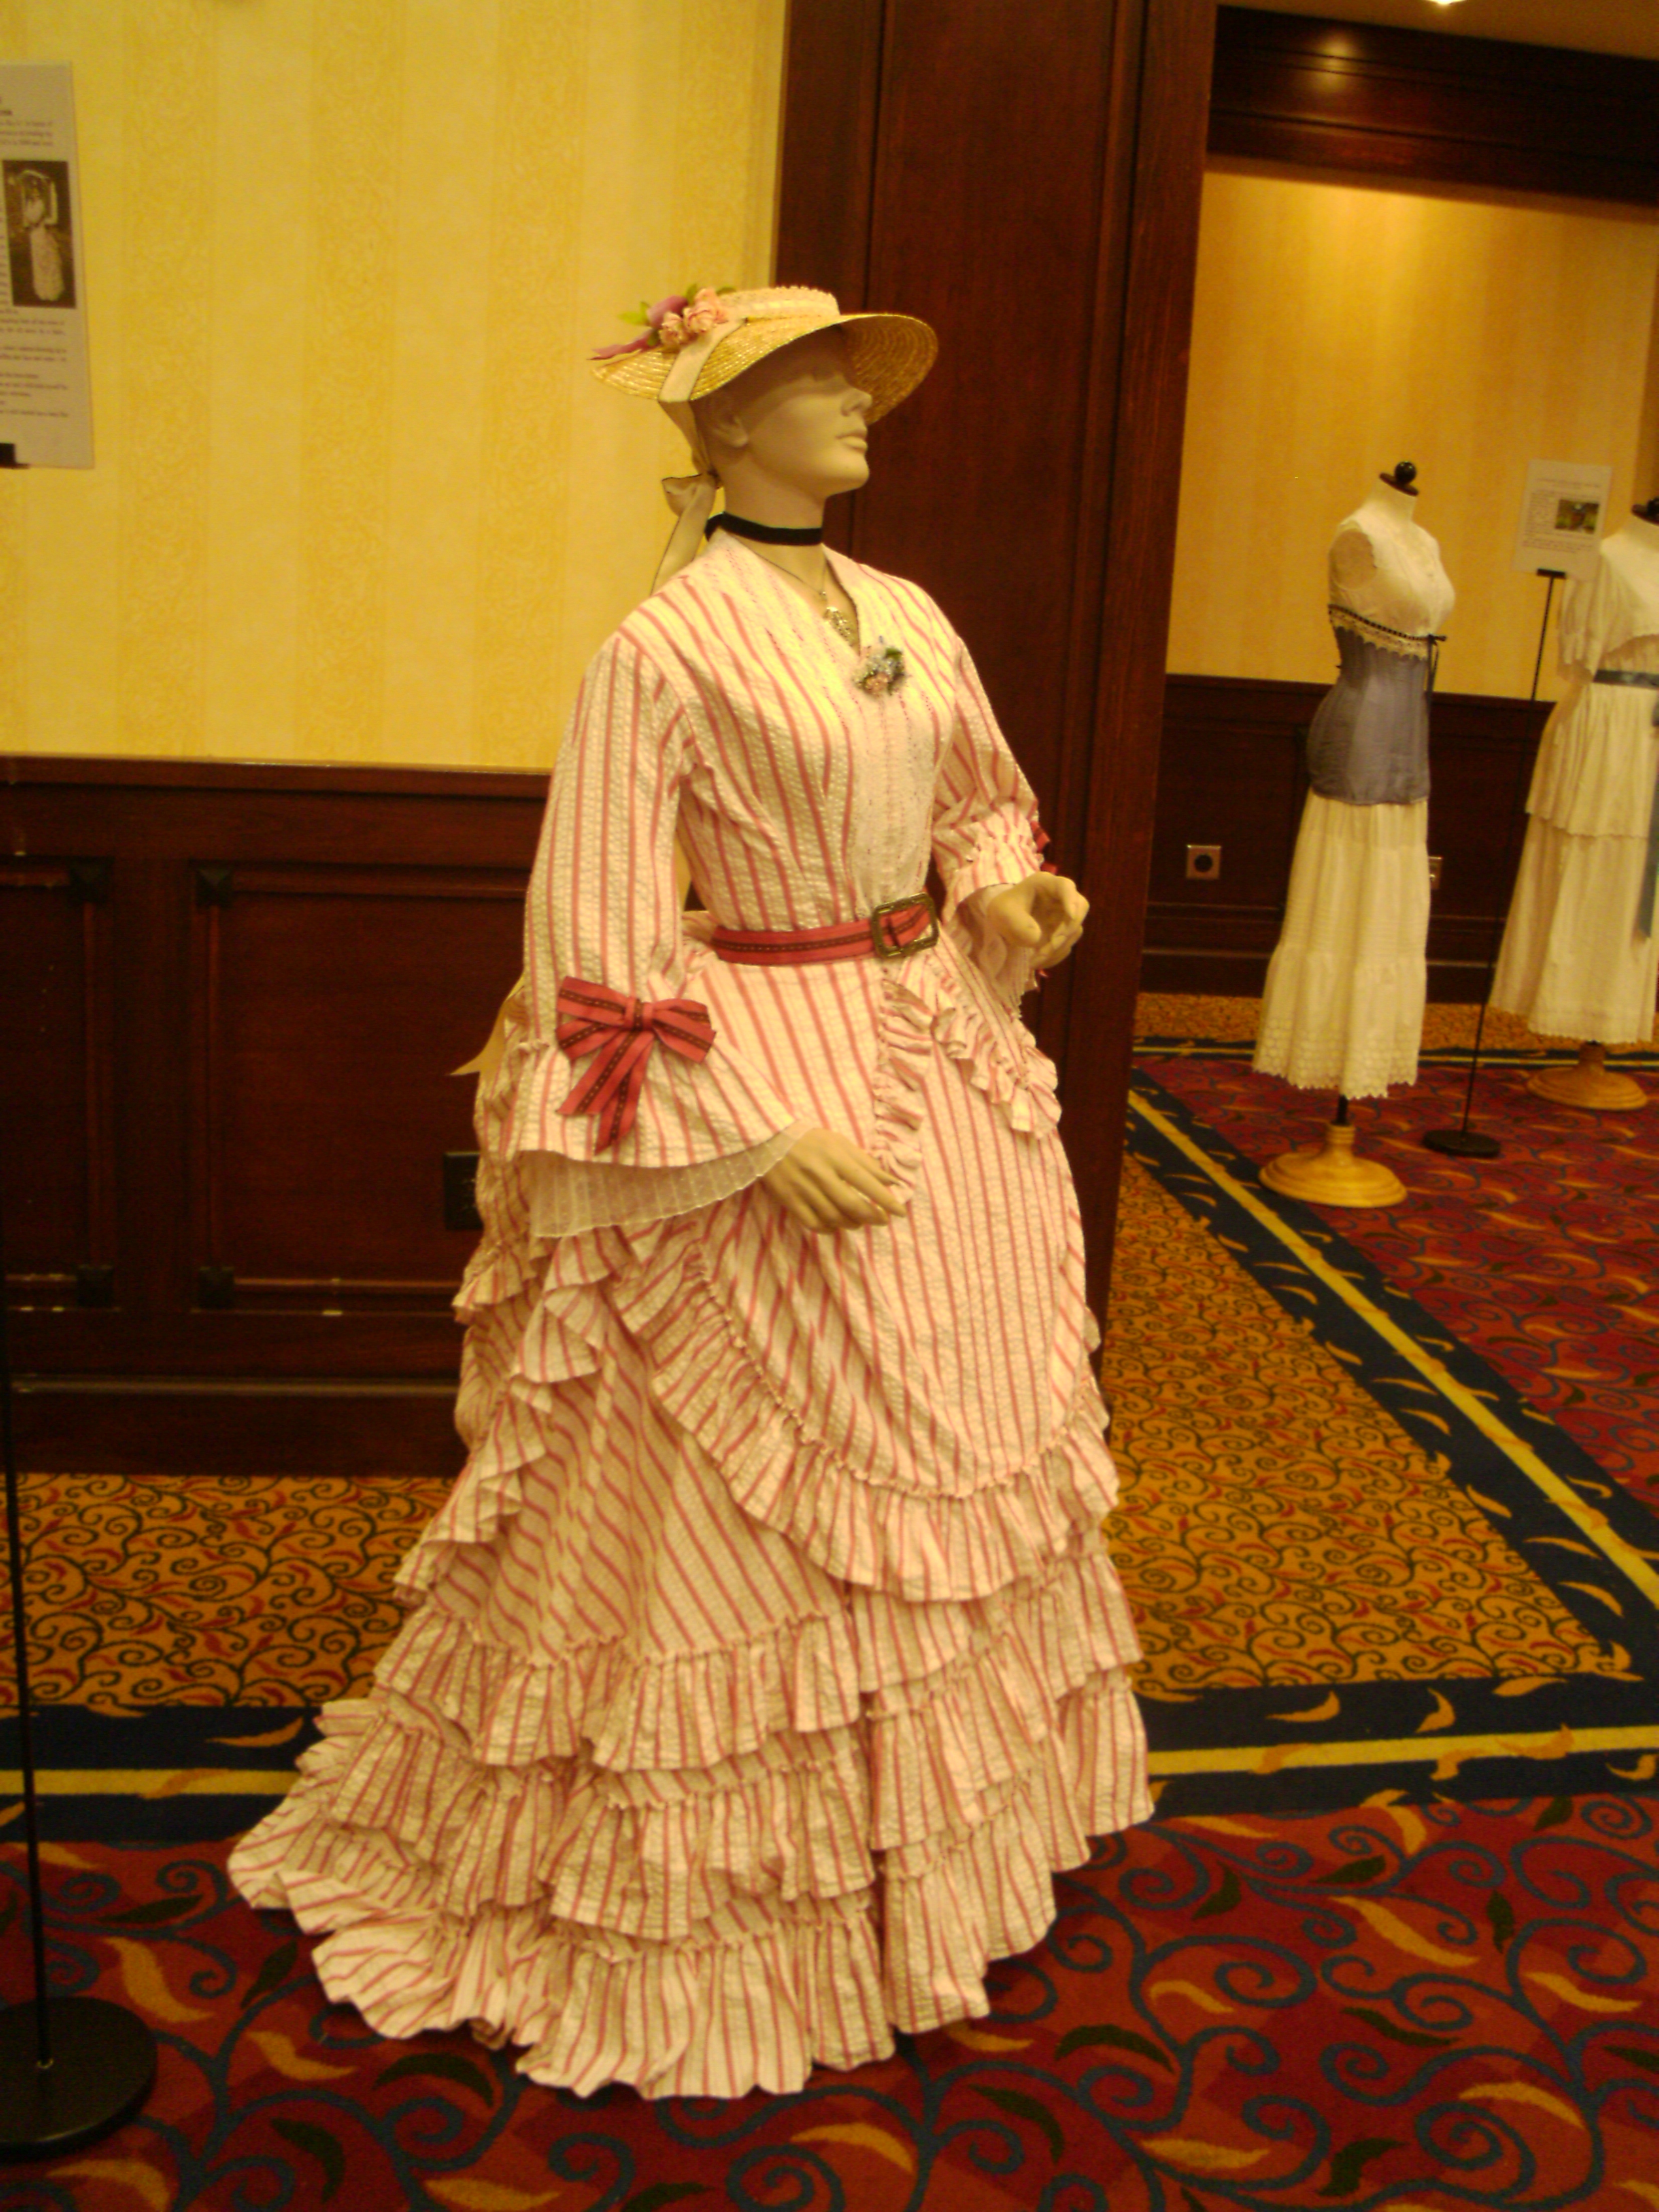 1870 bustle dress, manufactured from original 19th century patterns for display.